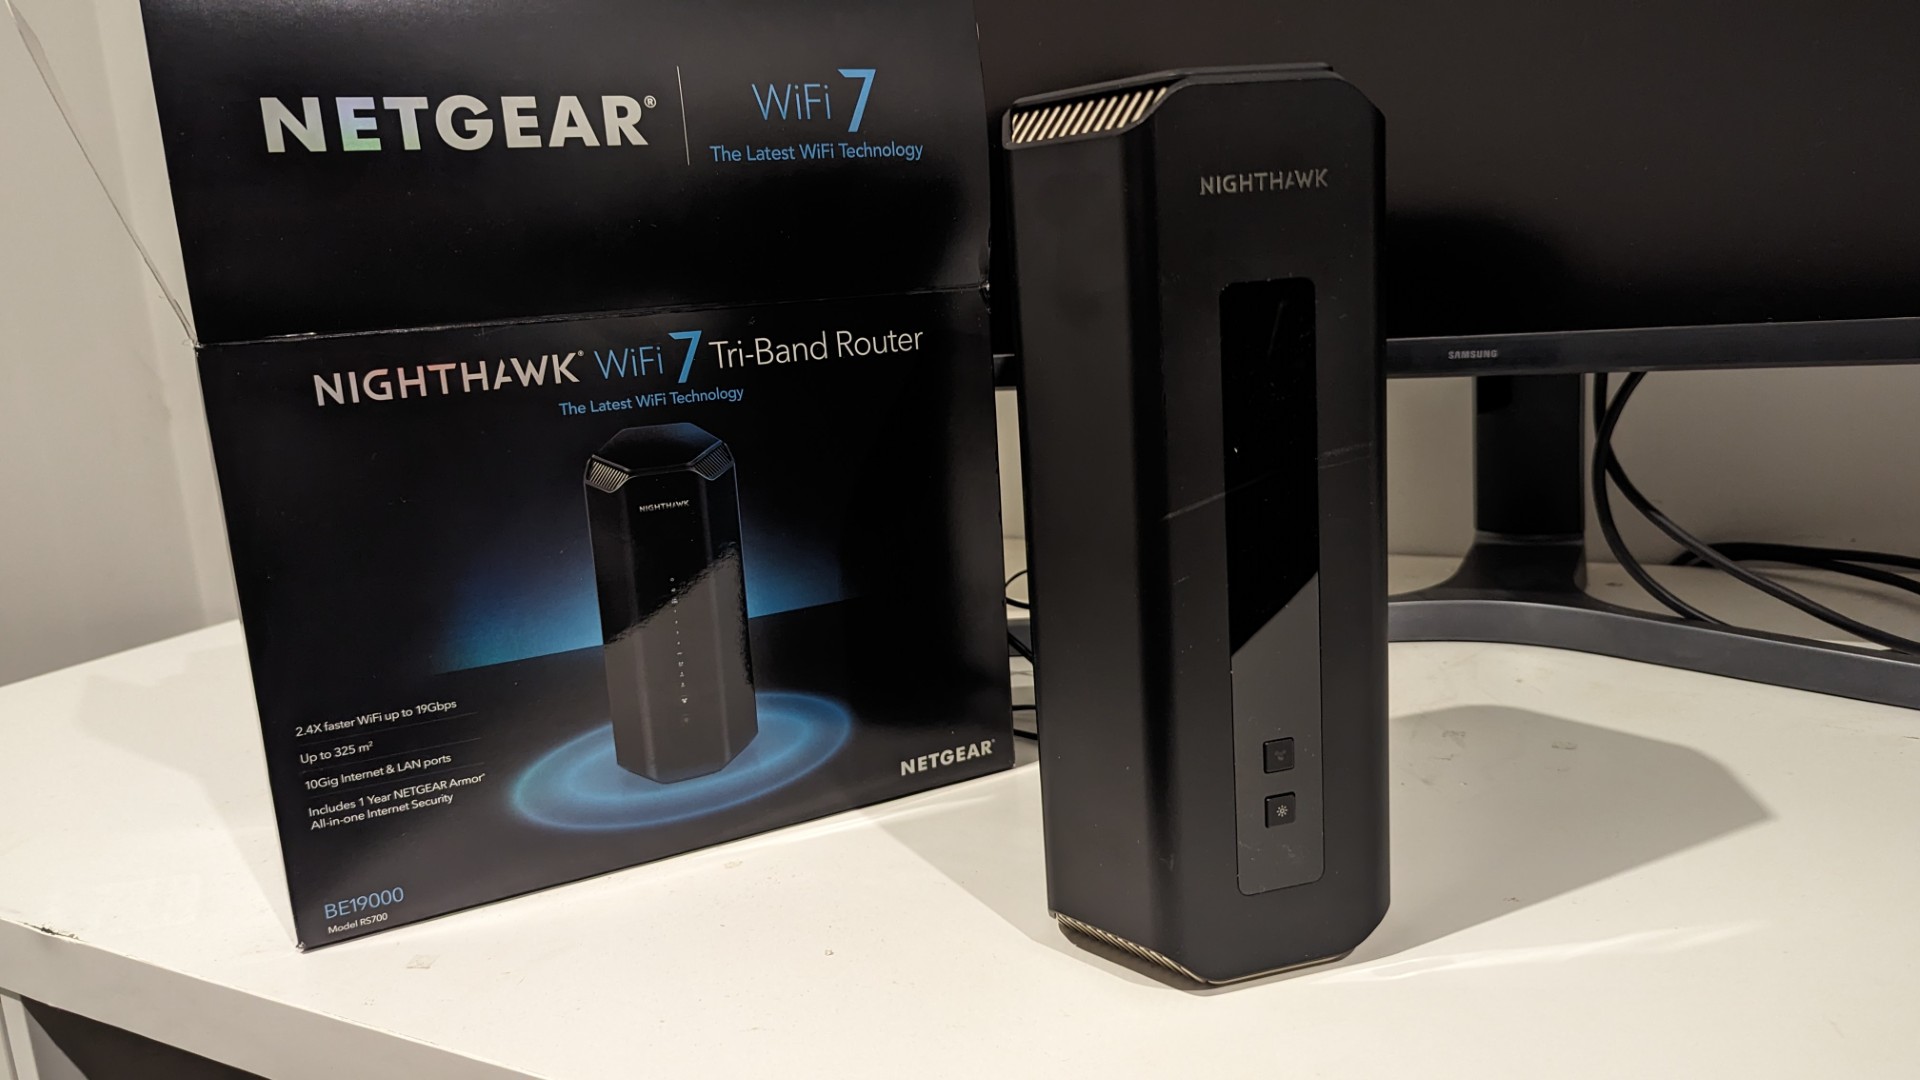 REVIEW: Netgear RS700 WiFi 7 Router is ready for the future of multi-gig internet, but you’ll pay for that